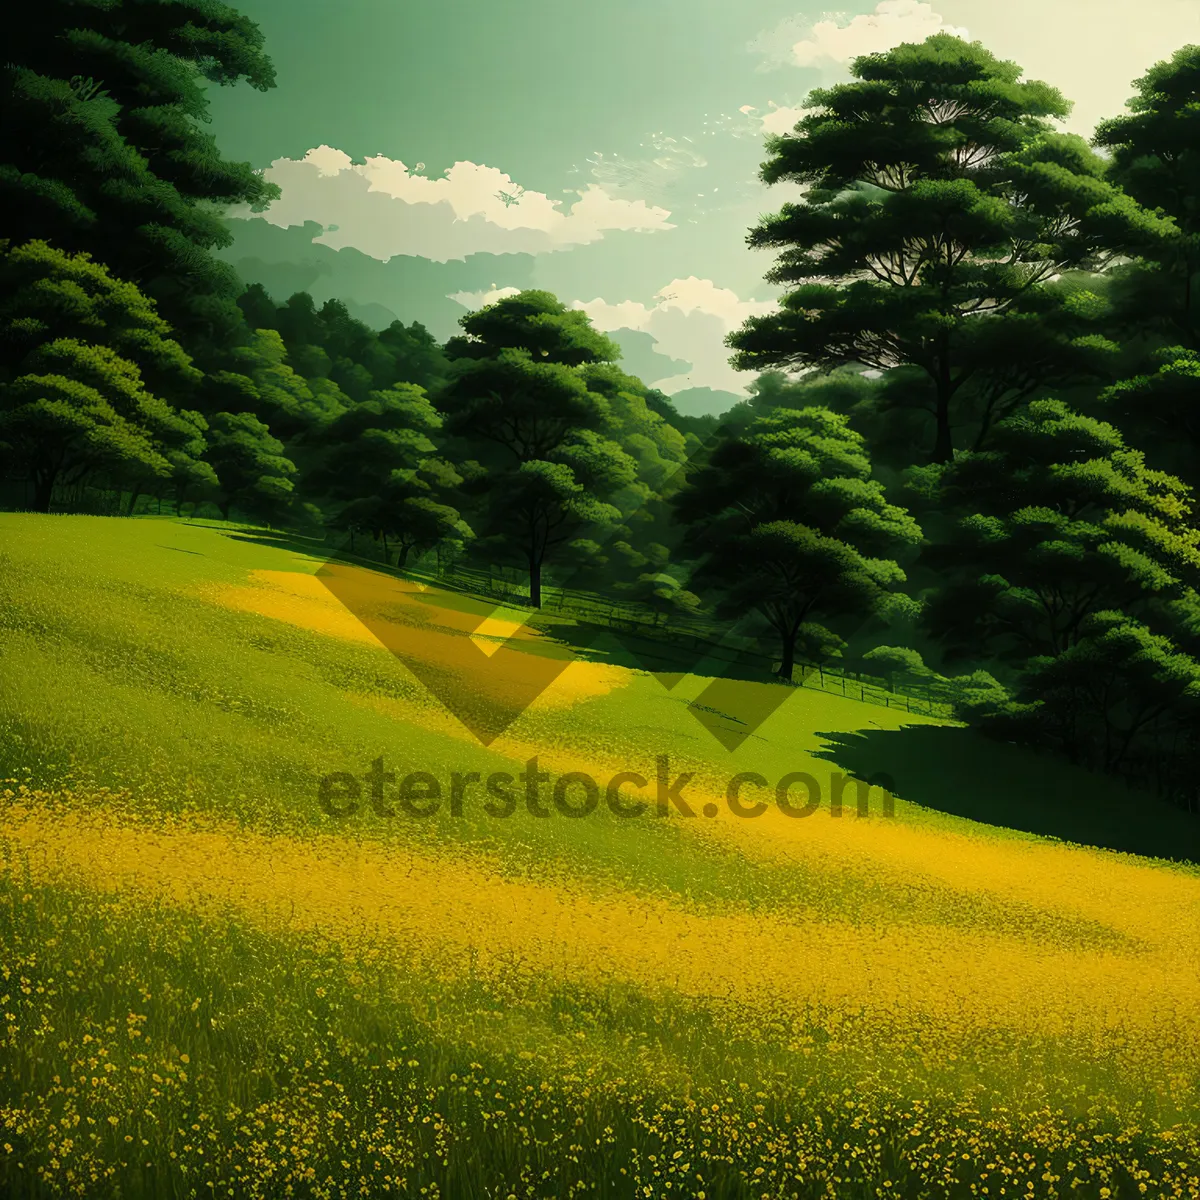 Picture of Summertime Serenity: Vibrant Fields Under Clear Skies